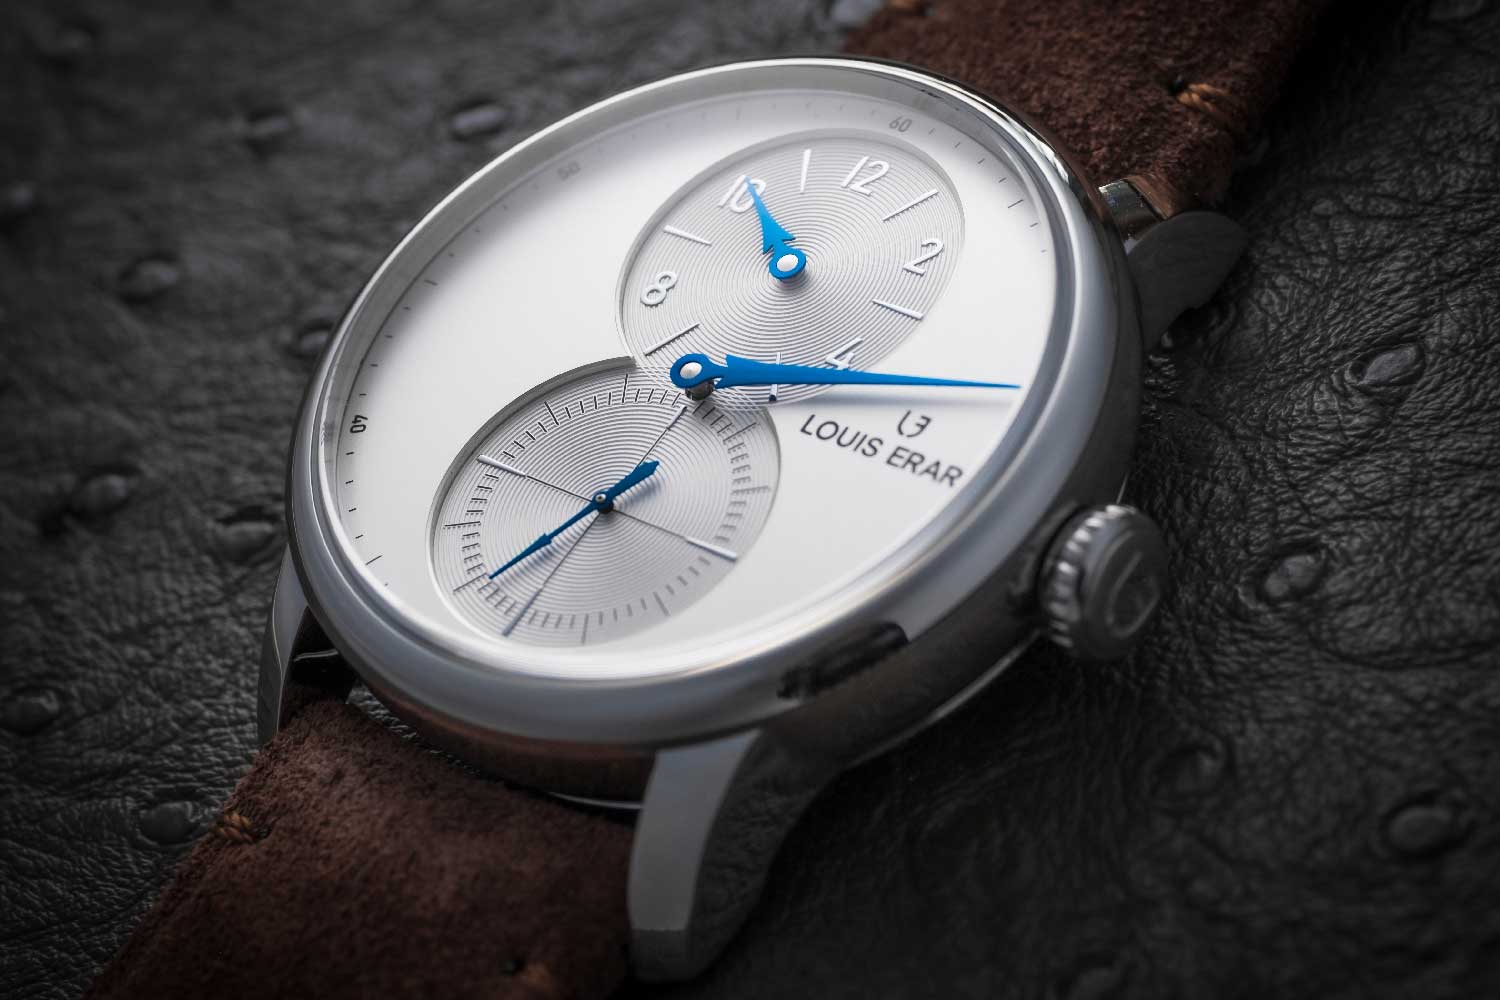 The dial’s design strikes a fine balance between being inspired by the golden era of mid-century watch design while also feeling contemporary and original.